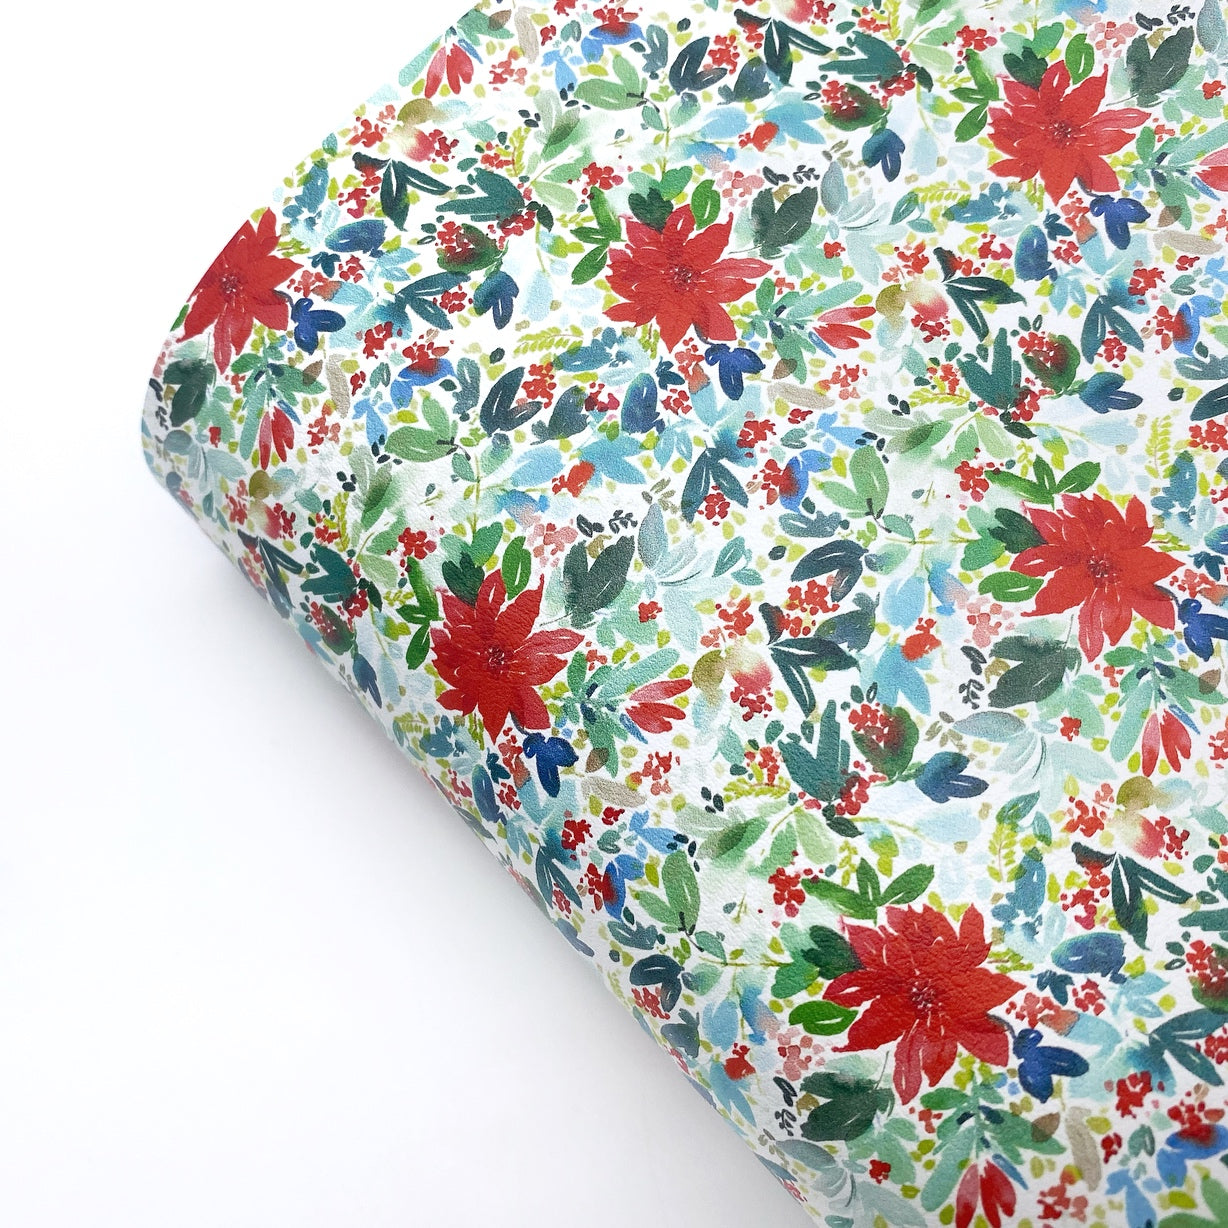 Xmas Lush Blooms Premium Faux Leather Fabric Sheets